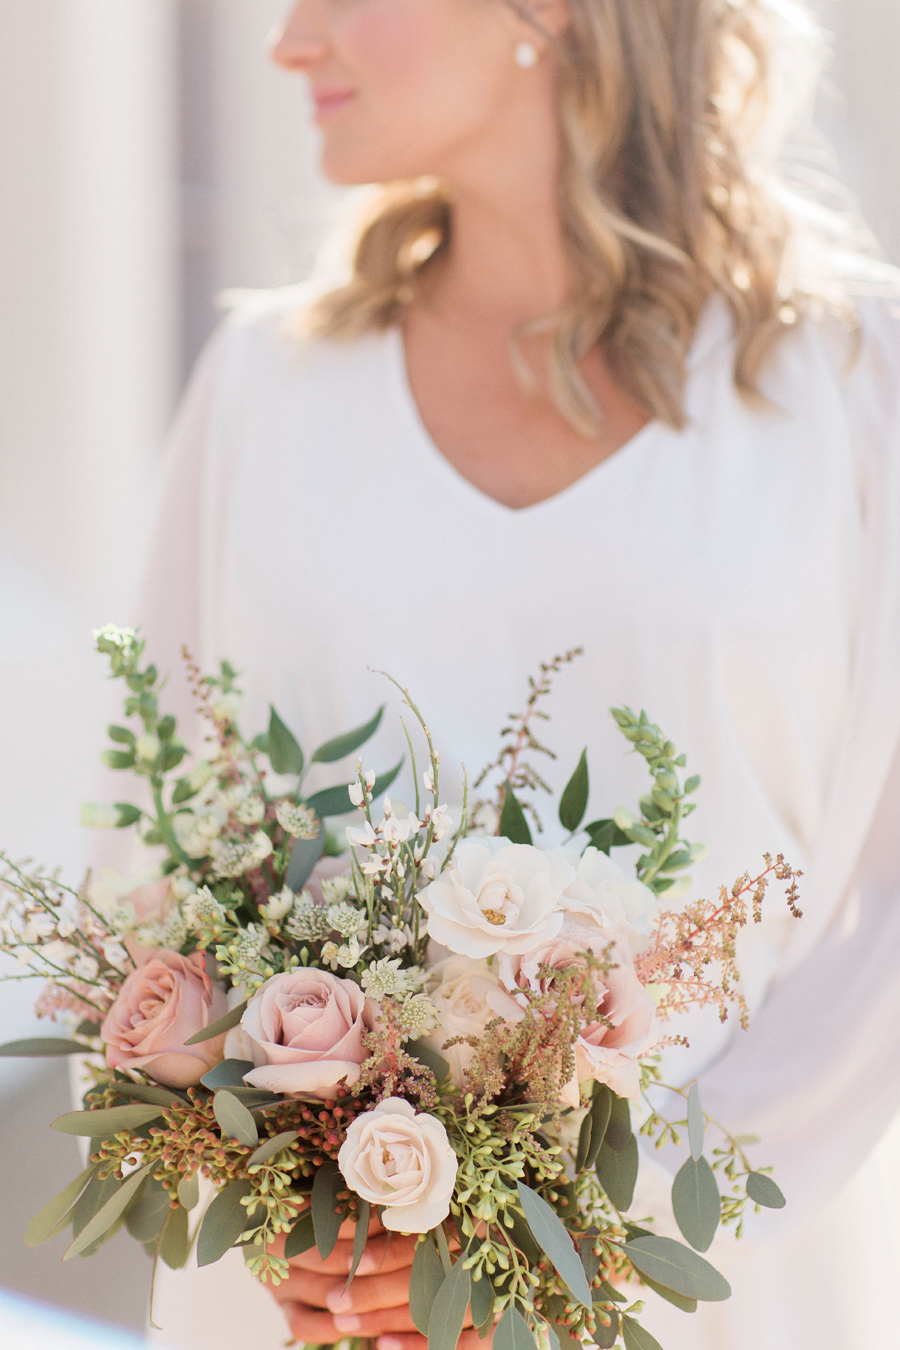 The bride poses with her bouquet by Sugarberry Blooms for a photo taken by wedding photographer Love Tree Studios at her intimate courthouse wedding..